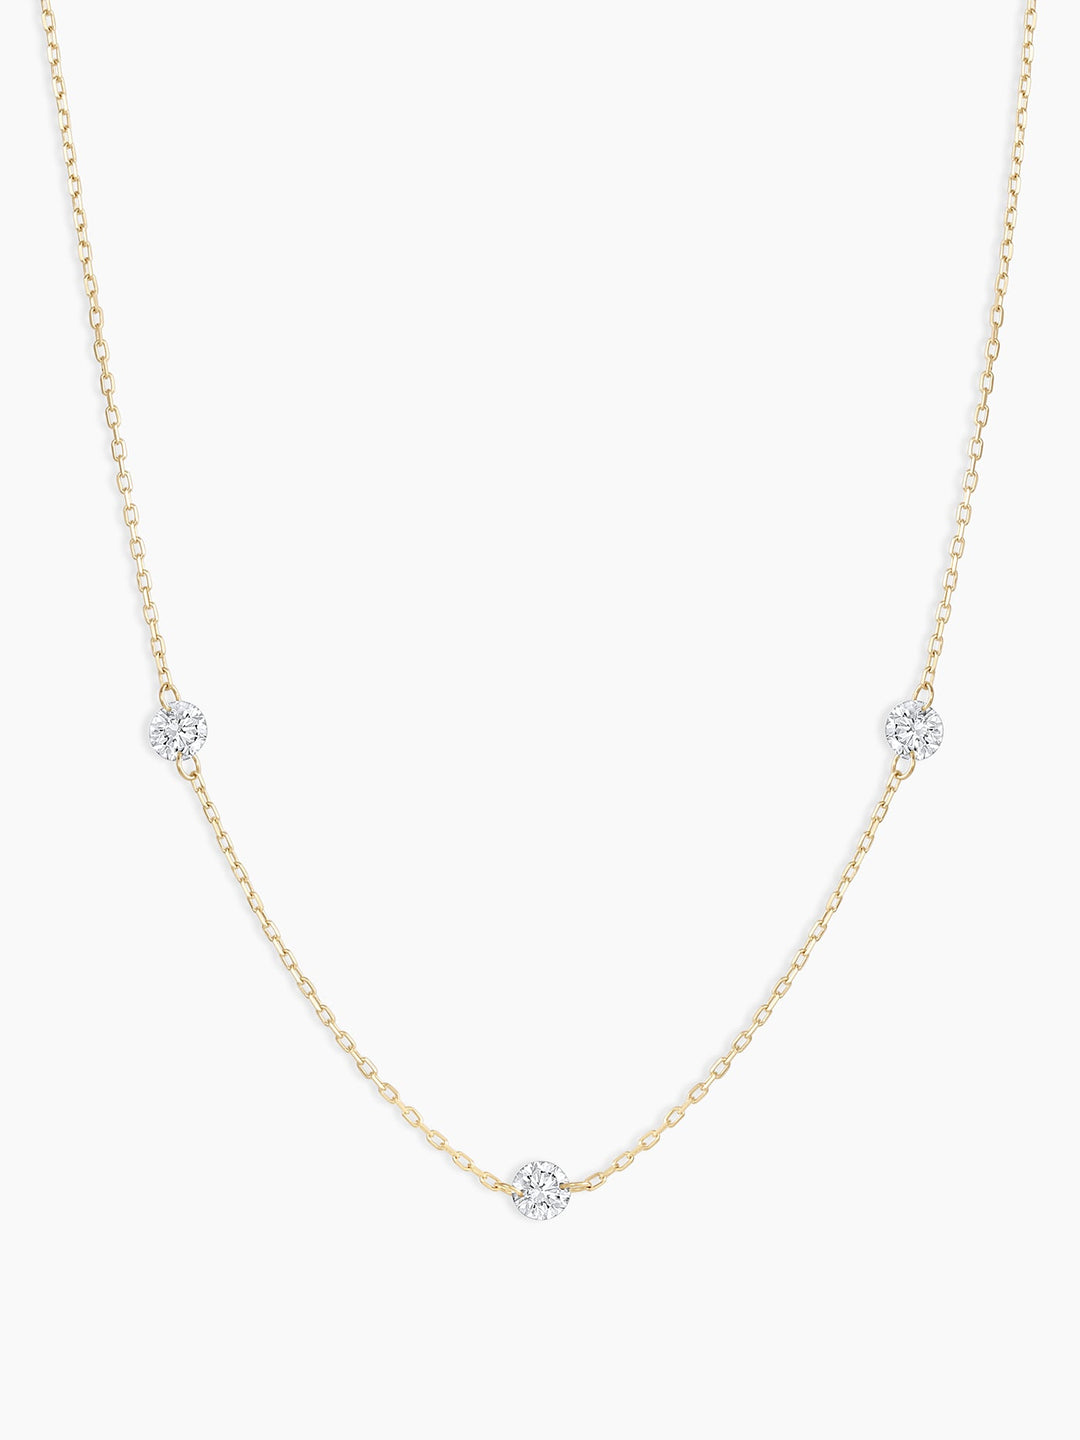 Floating Diamond Stationary Trio Necklace || option::18k Solid Gold